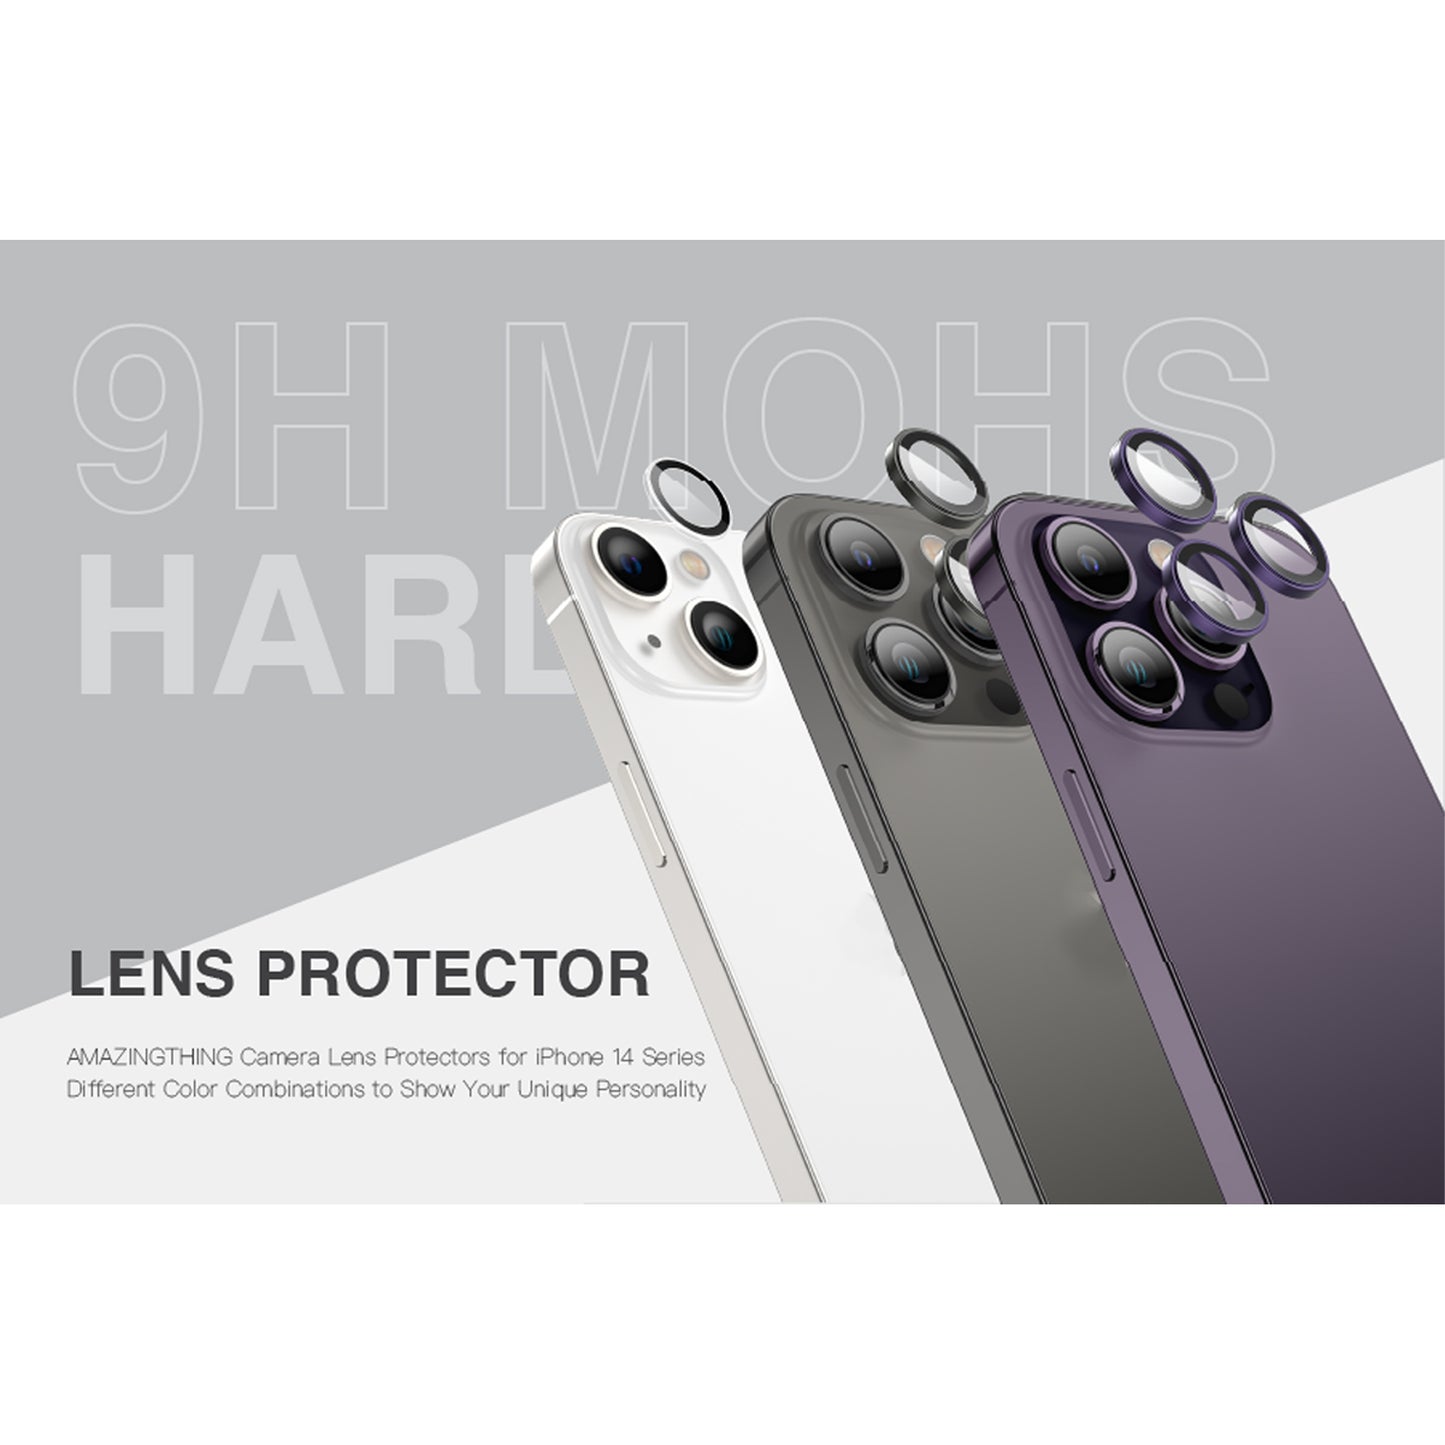 Amazingthing Lens Protector for iPhone 14 - 14 Plus - Silver (Barcode: 4892878076036 )